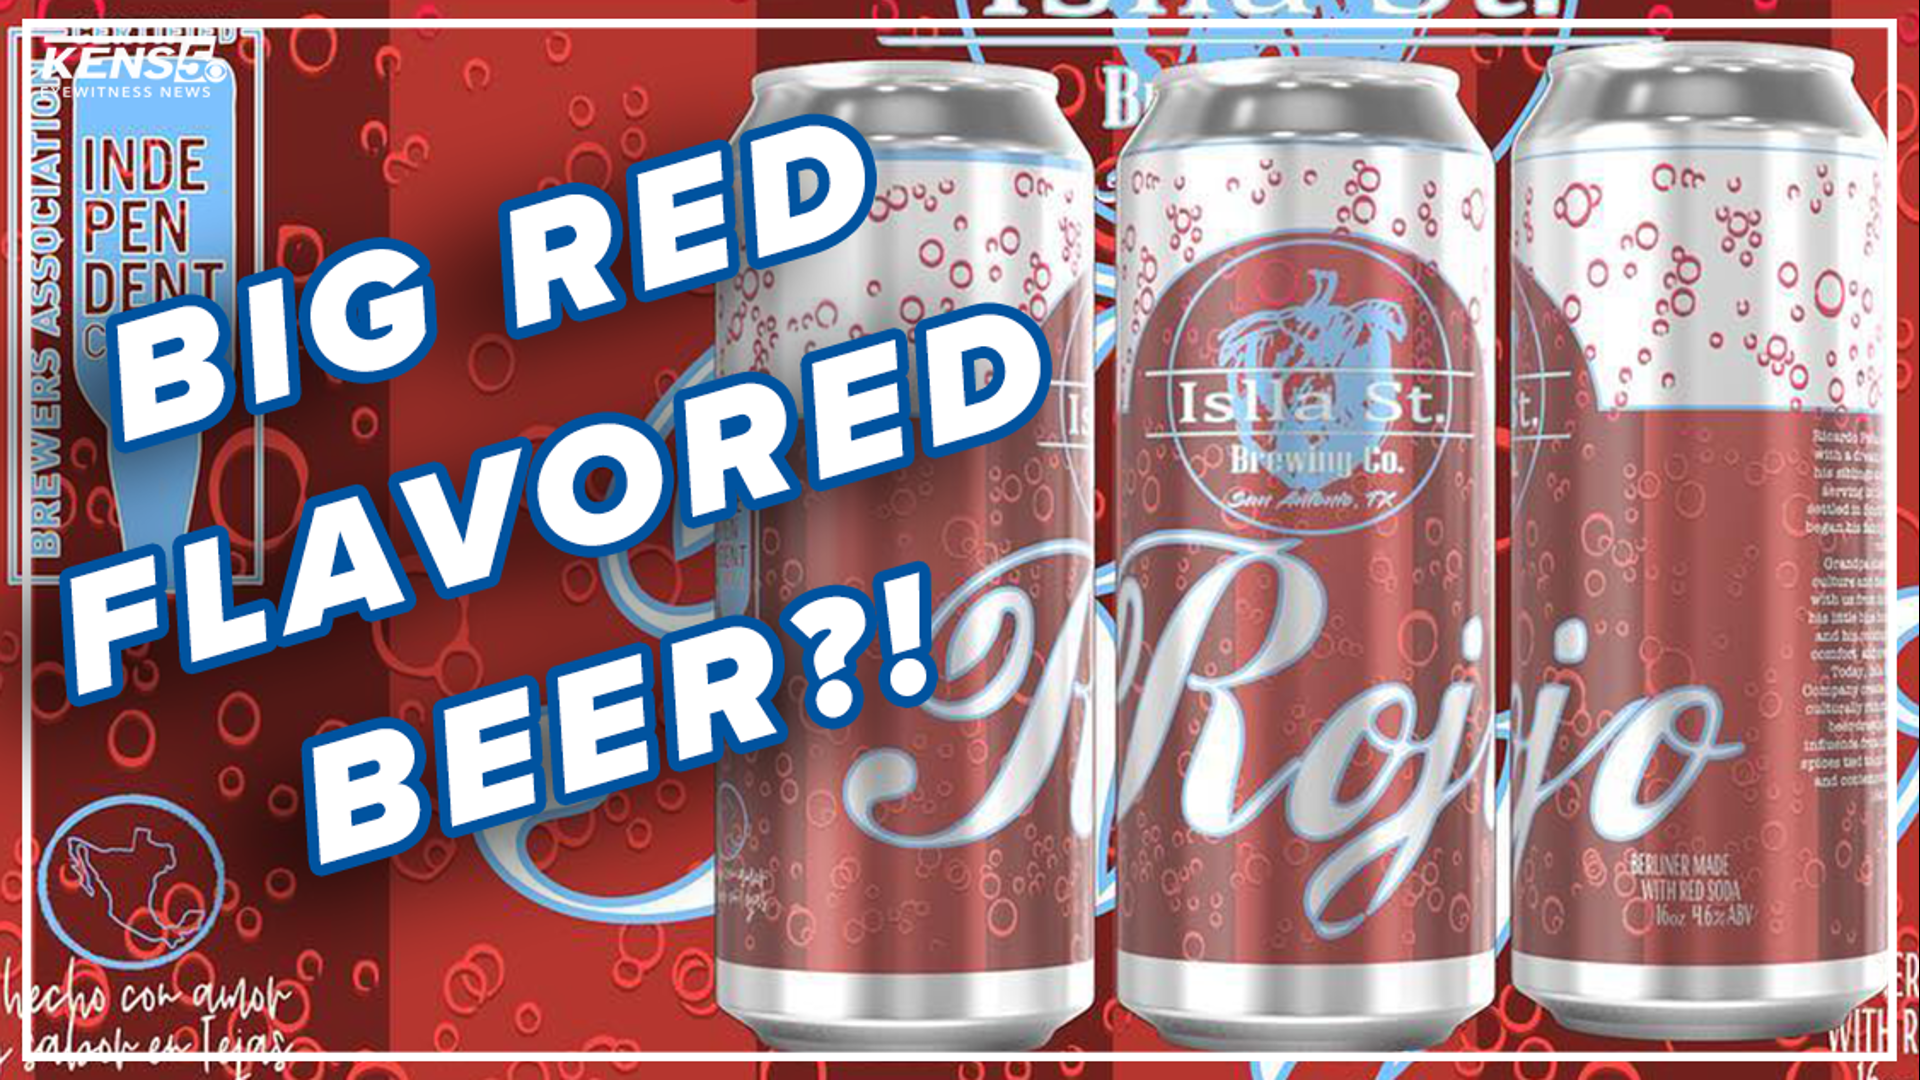 From Big Red flavored beer to Topo Chico hard seltzer, digital reporter Lexi Hazlett shows you the latest drinks that are stirring up buzz on social media.